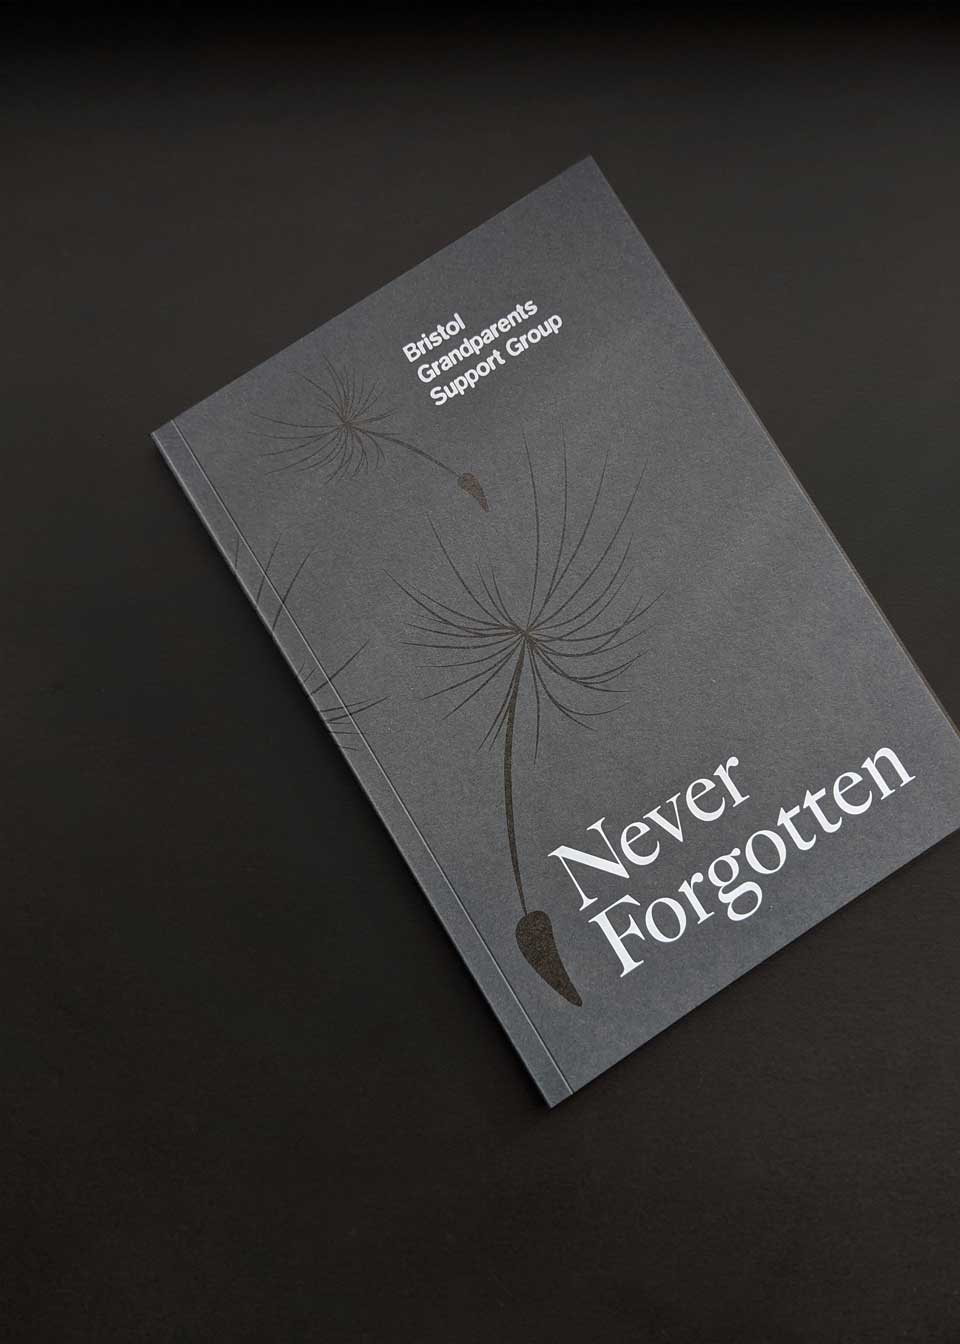 Front cover design for Never Forgotten book of poems